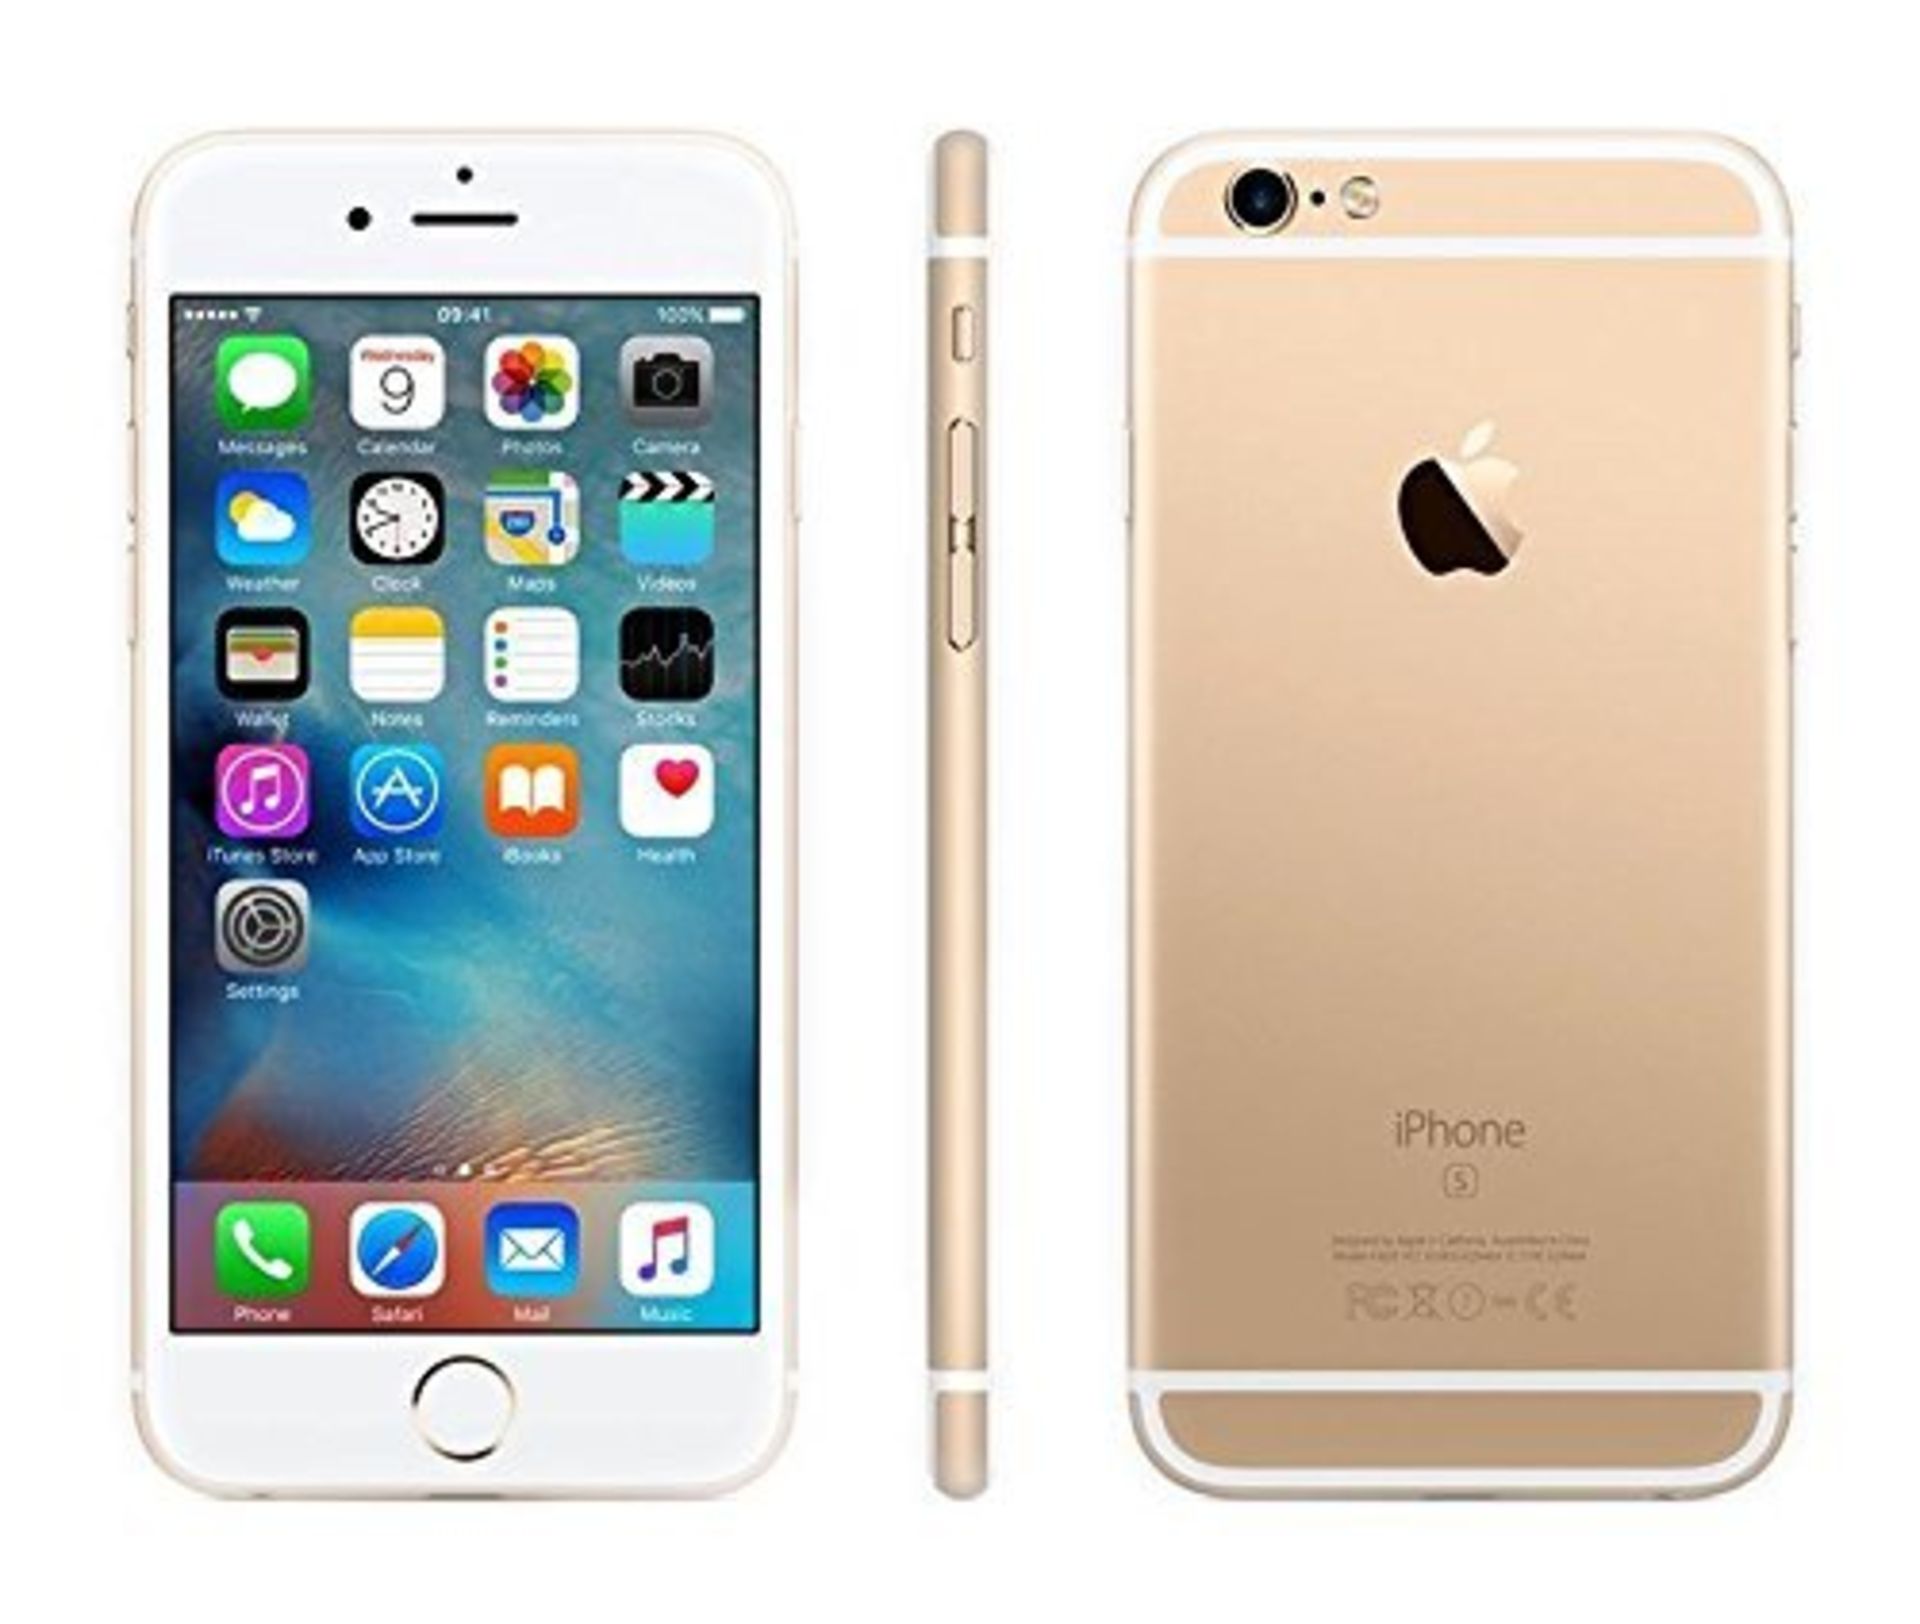 Grade A Apple iphone 6 128GB Colours May Vary Touch ID Item available approx 10 working days after